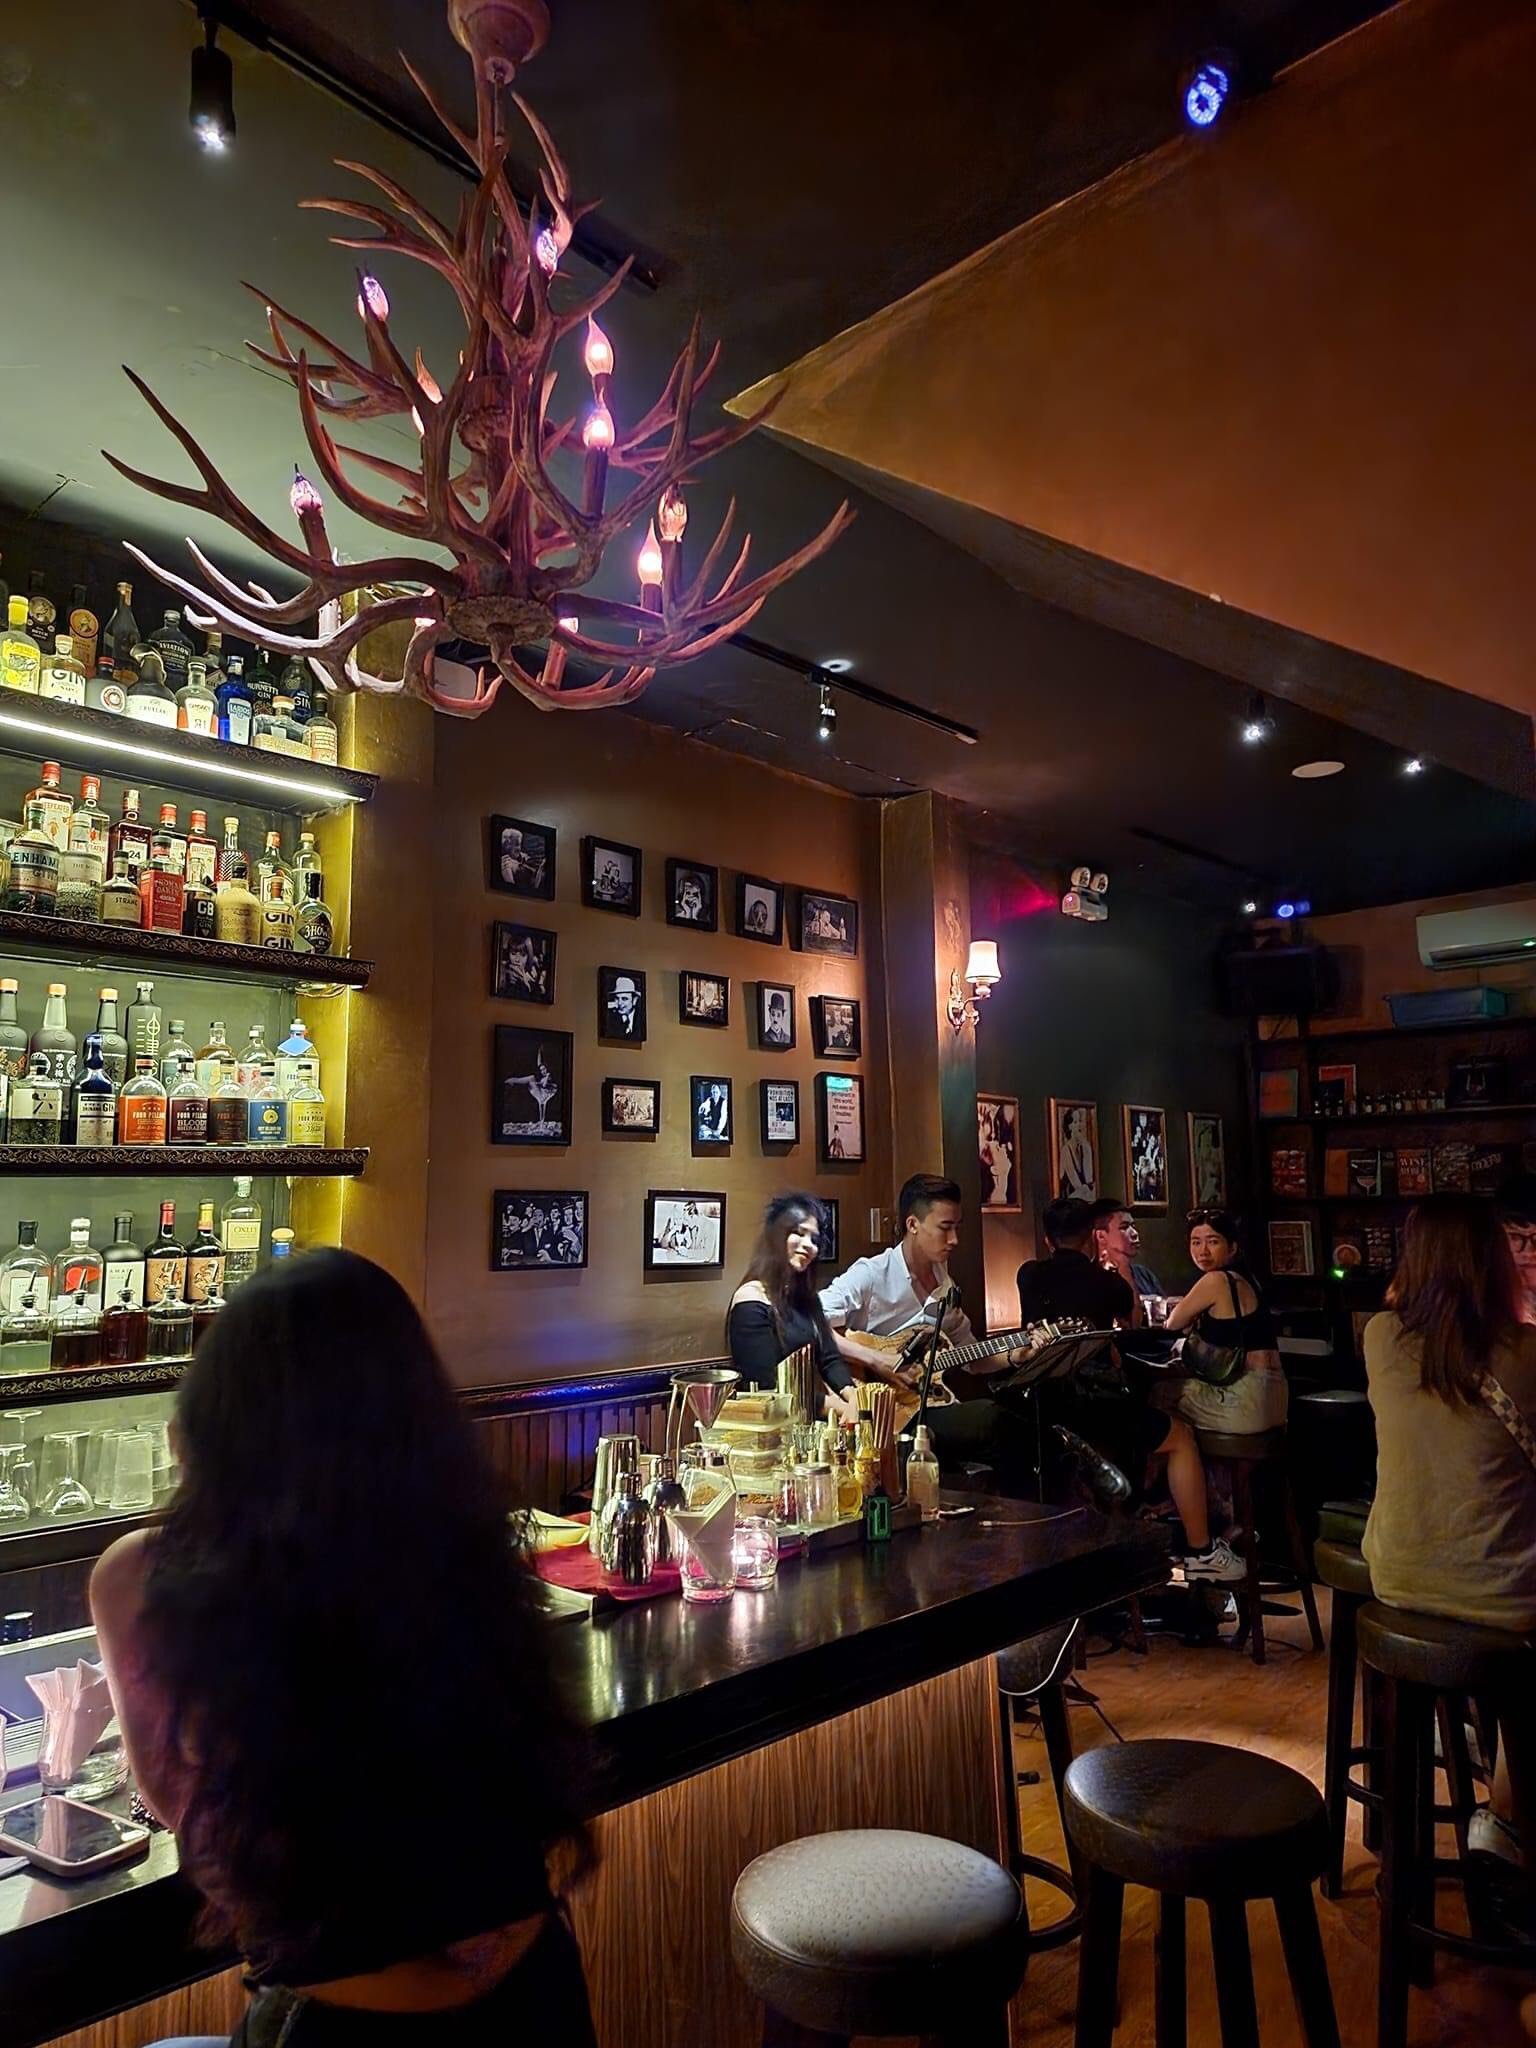 The Gin House Bar - A holy land of Gins